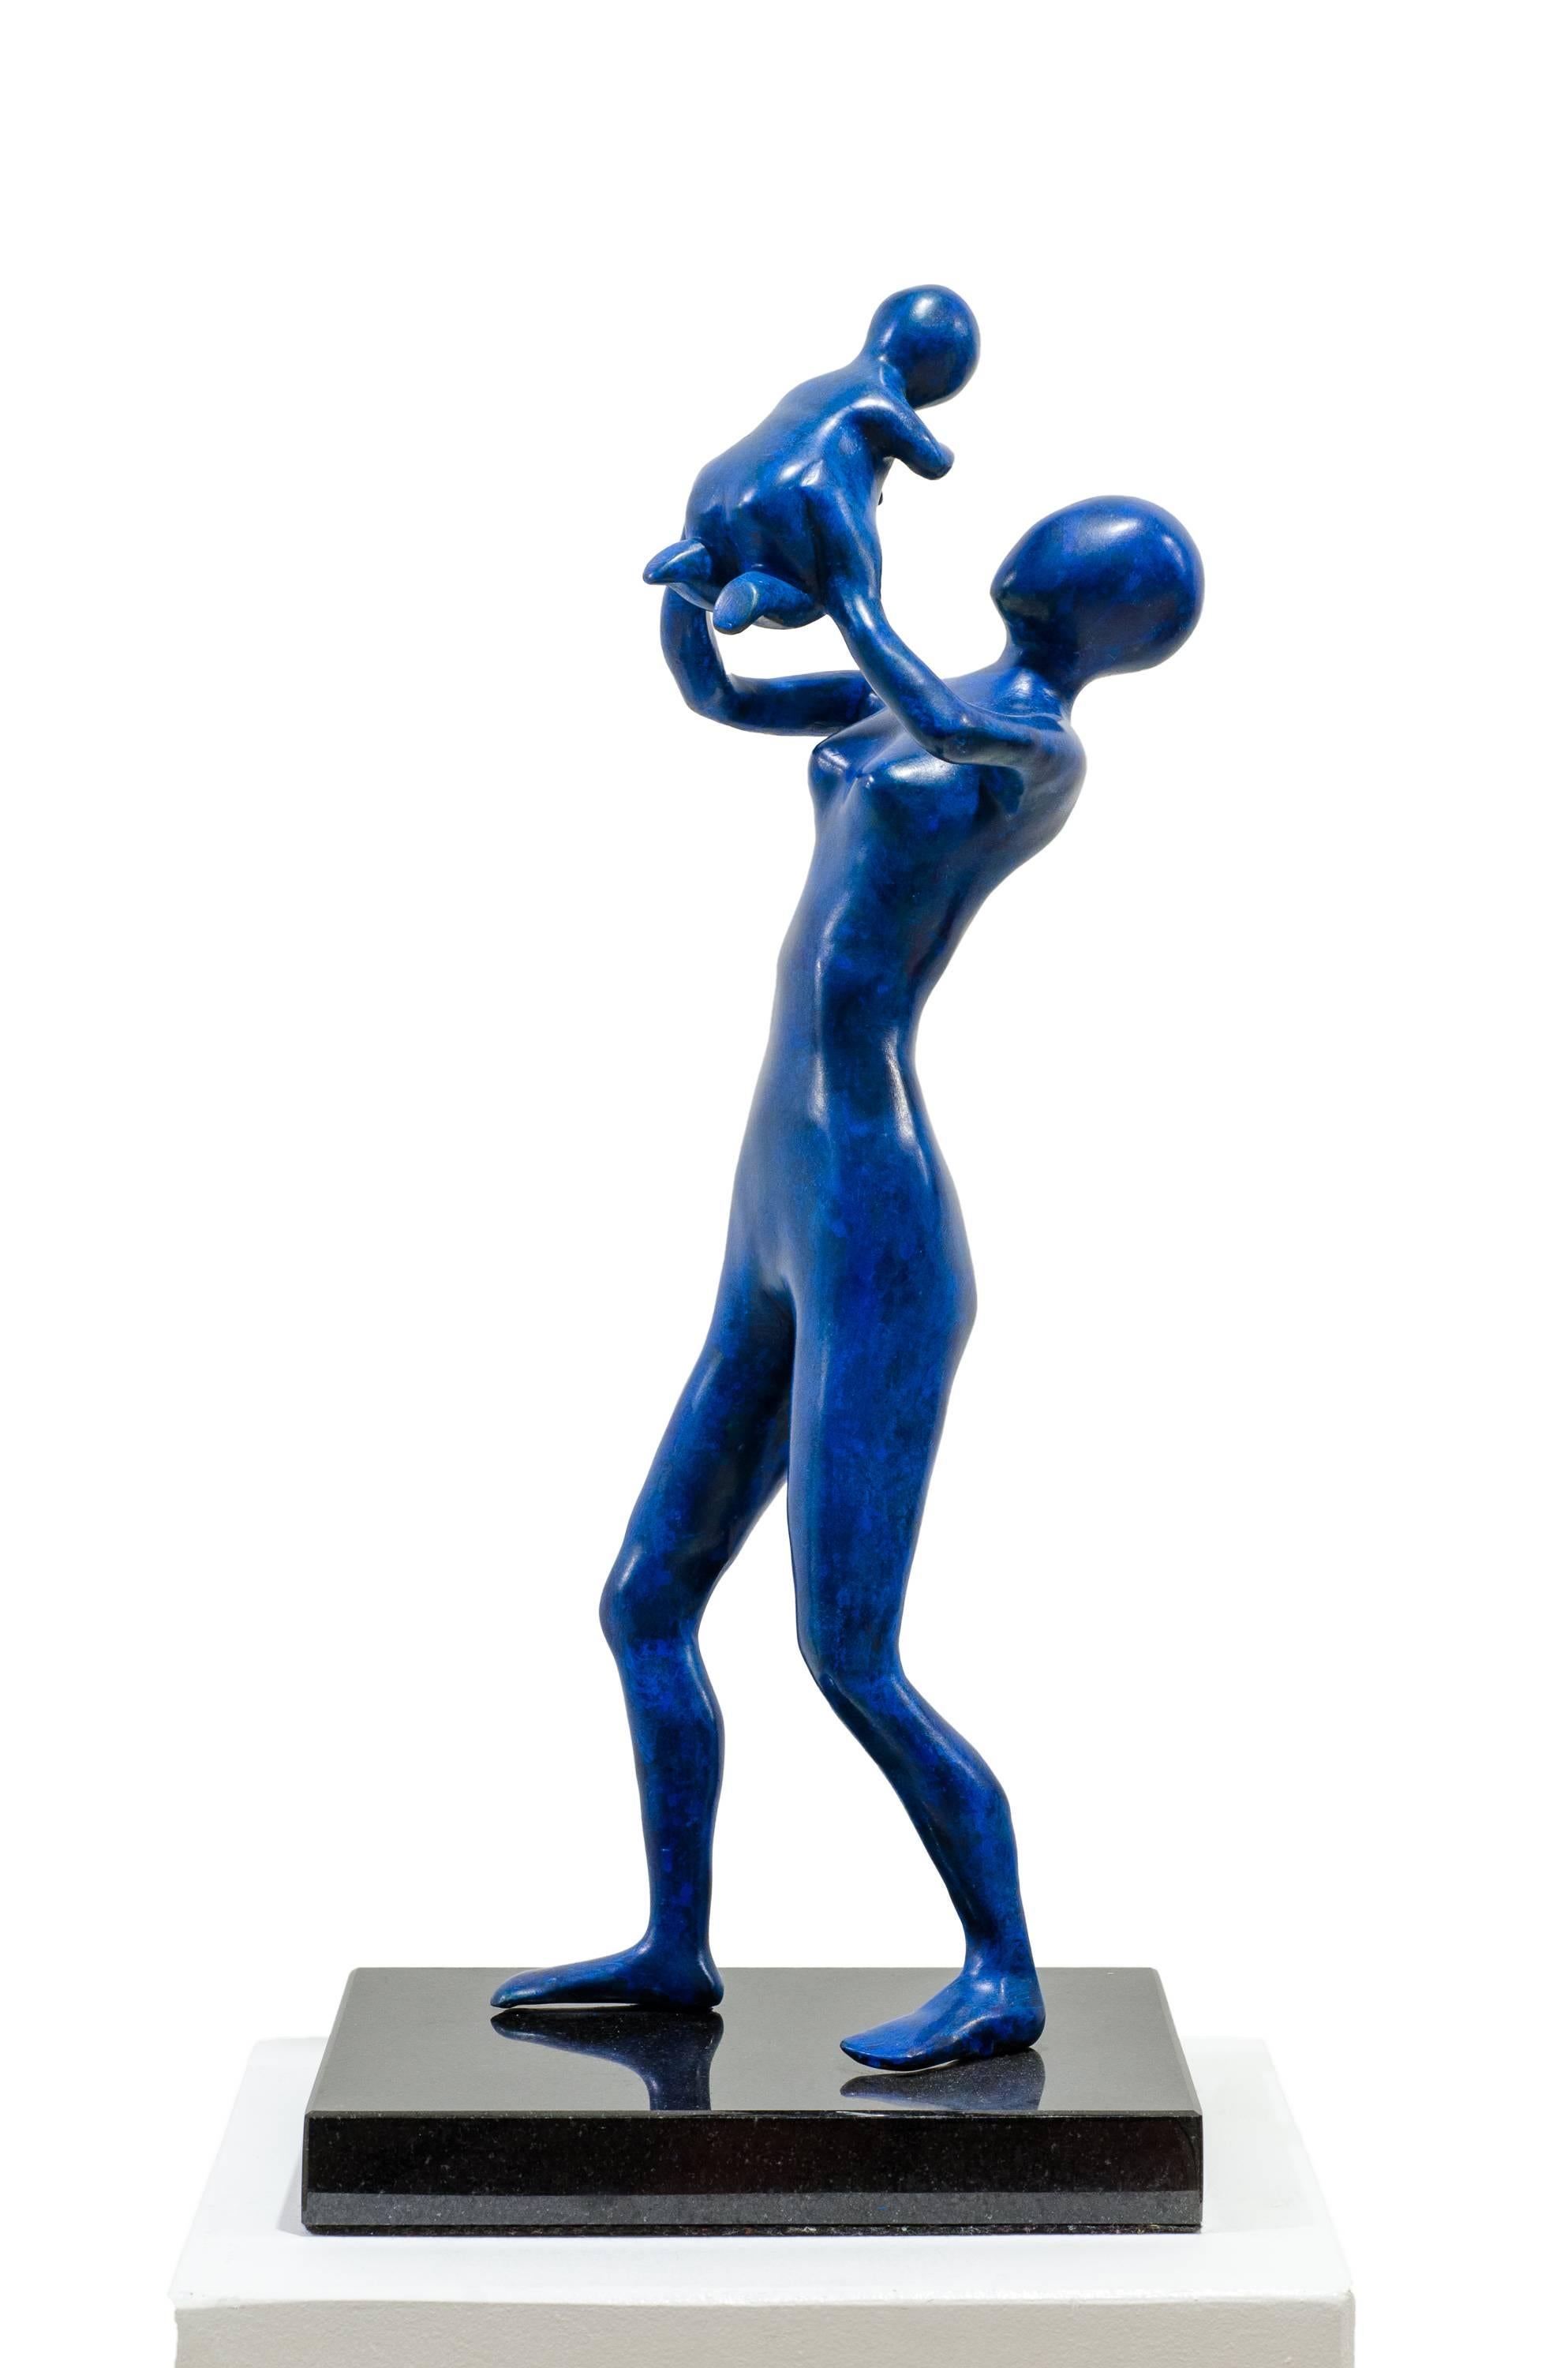 Mother in Blue. The mother proudly holds up her baby, enjoying the laughter - Abstract Sculpture by Beatriz Gerenstein